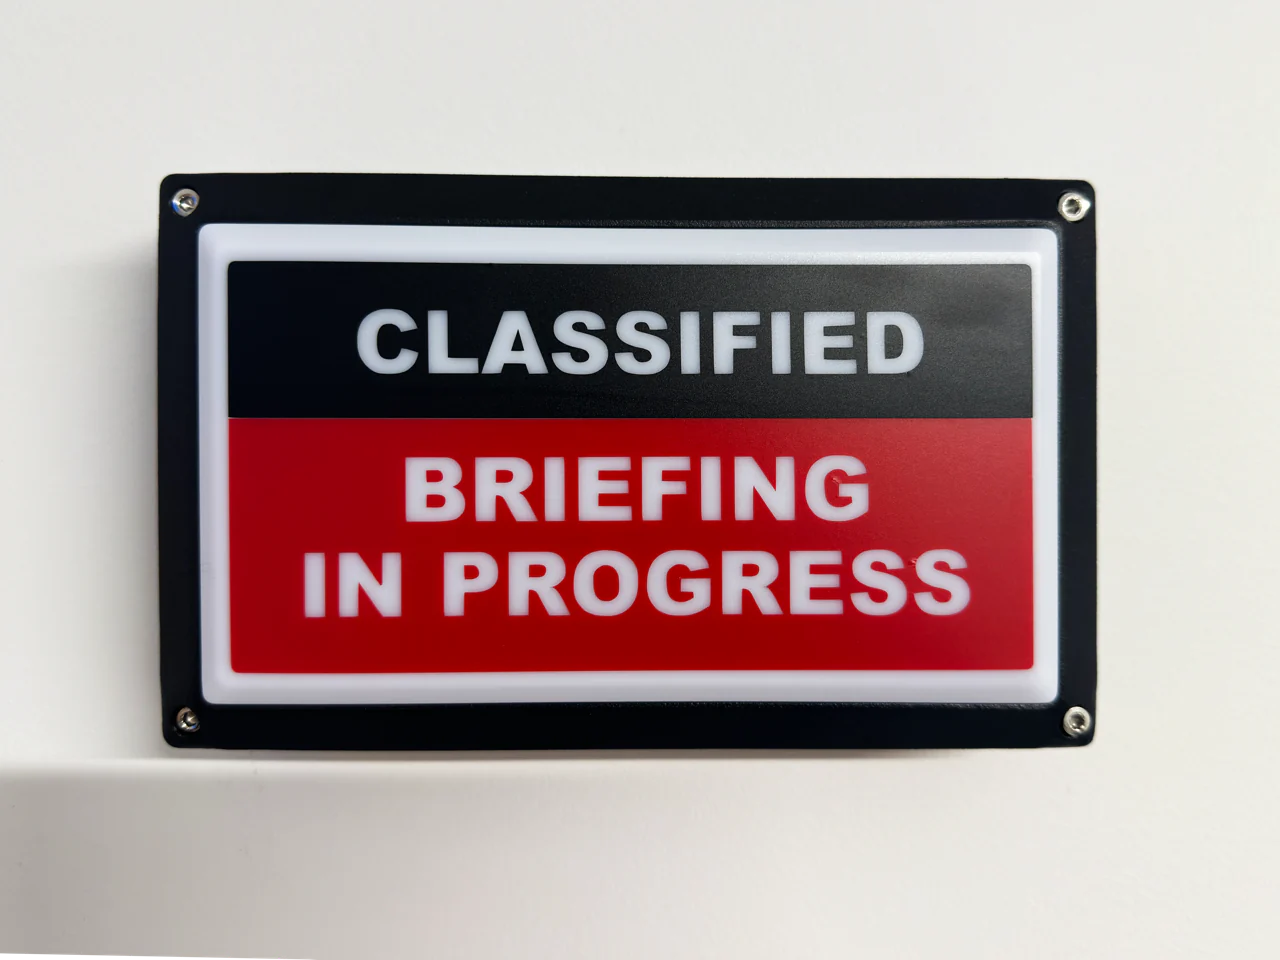 Classified Briefing In Progress Light - Red ISO - Rekall Dynamics LED Sign